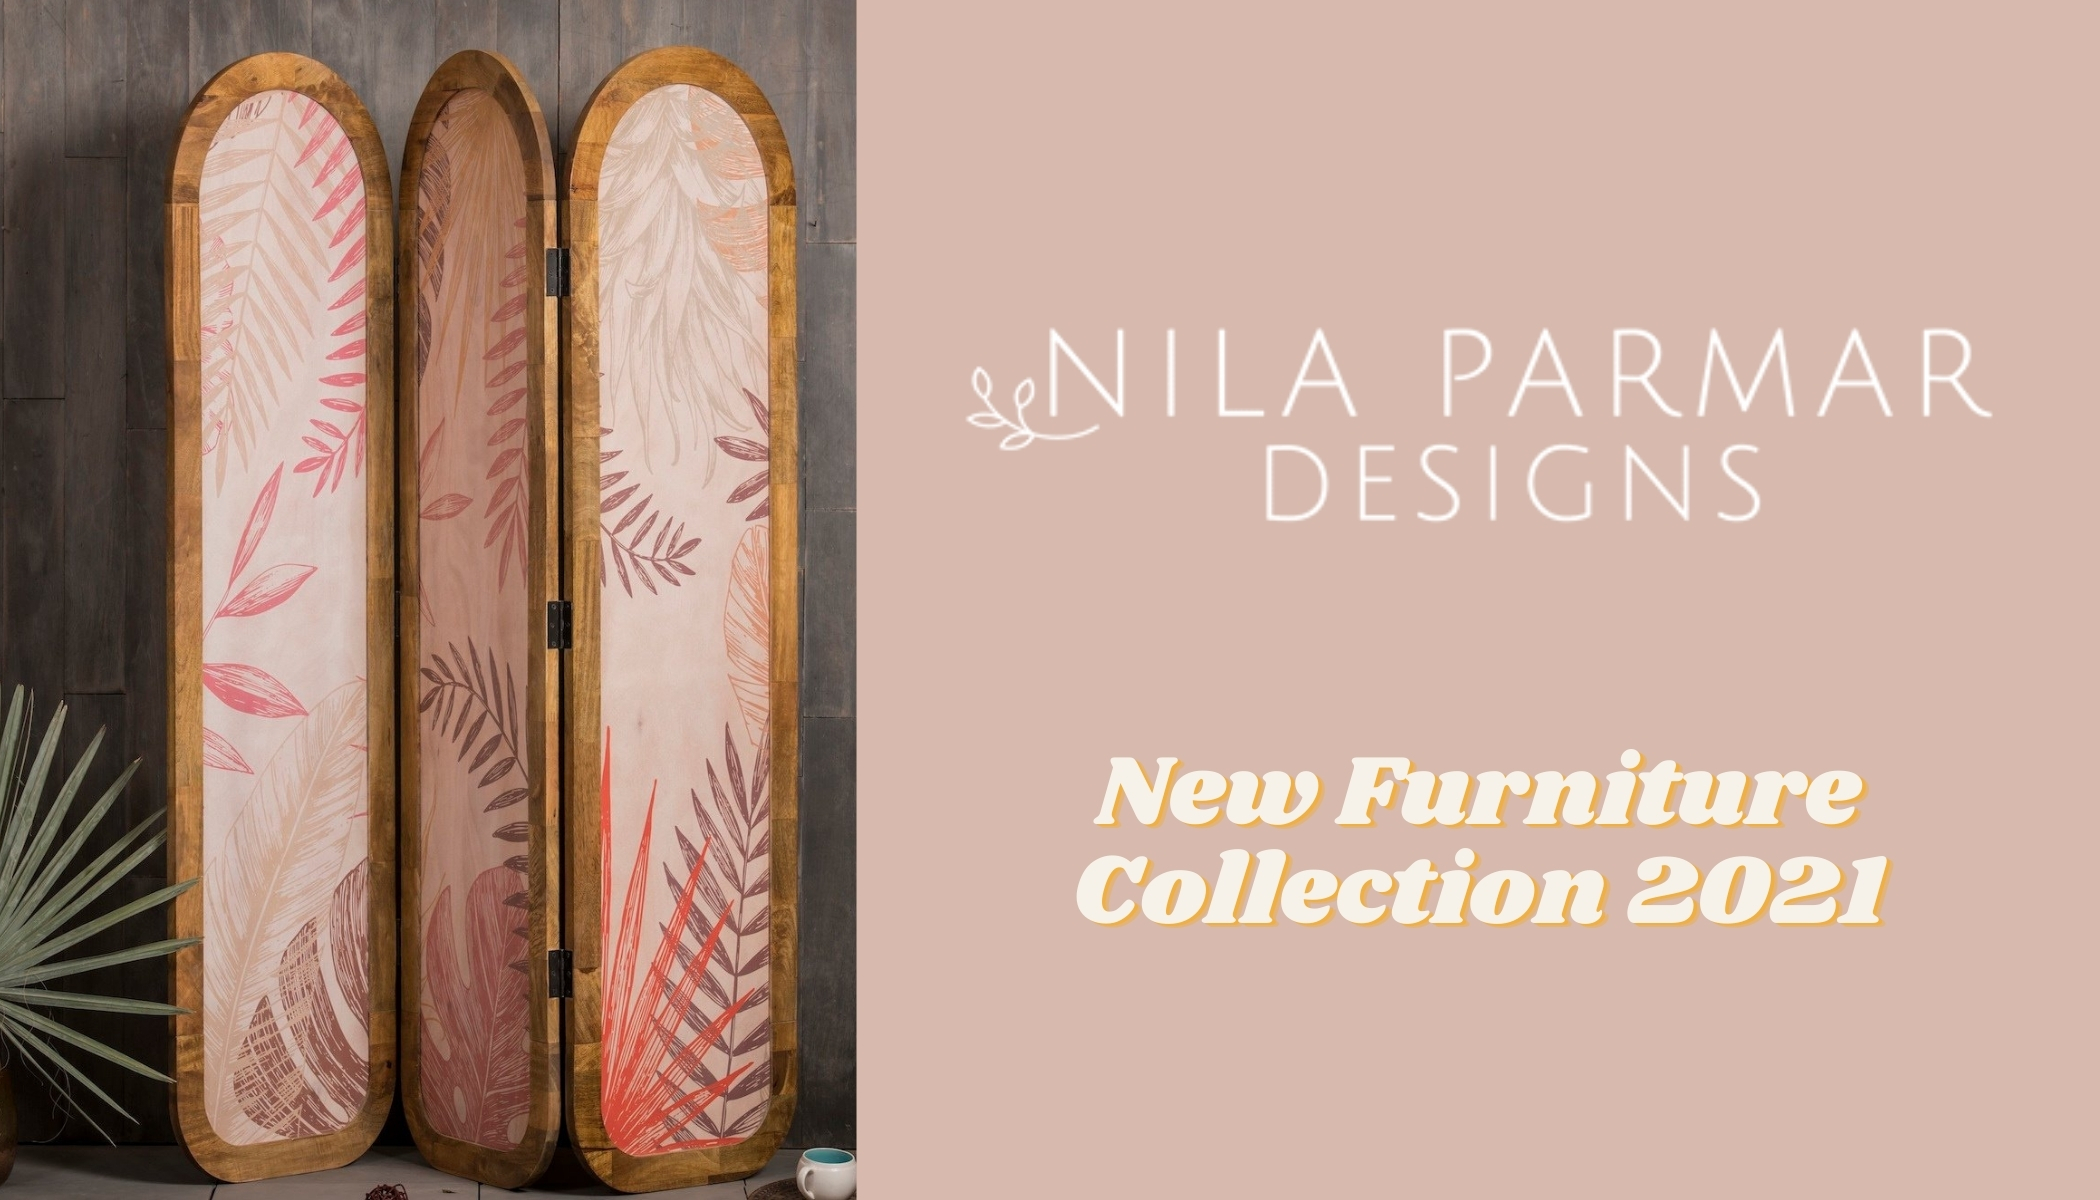 New furniture Collection 2021